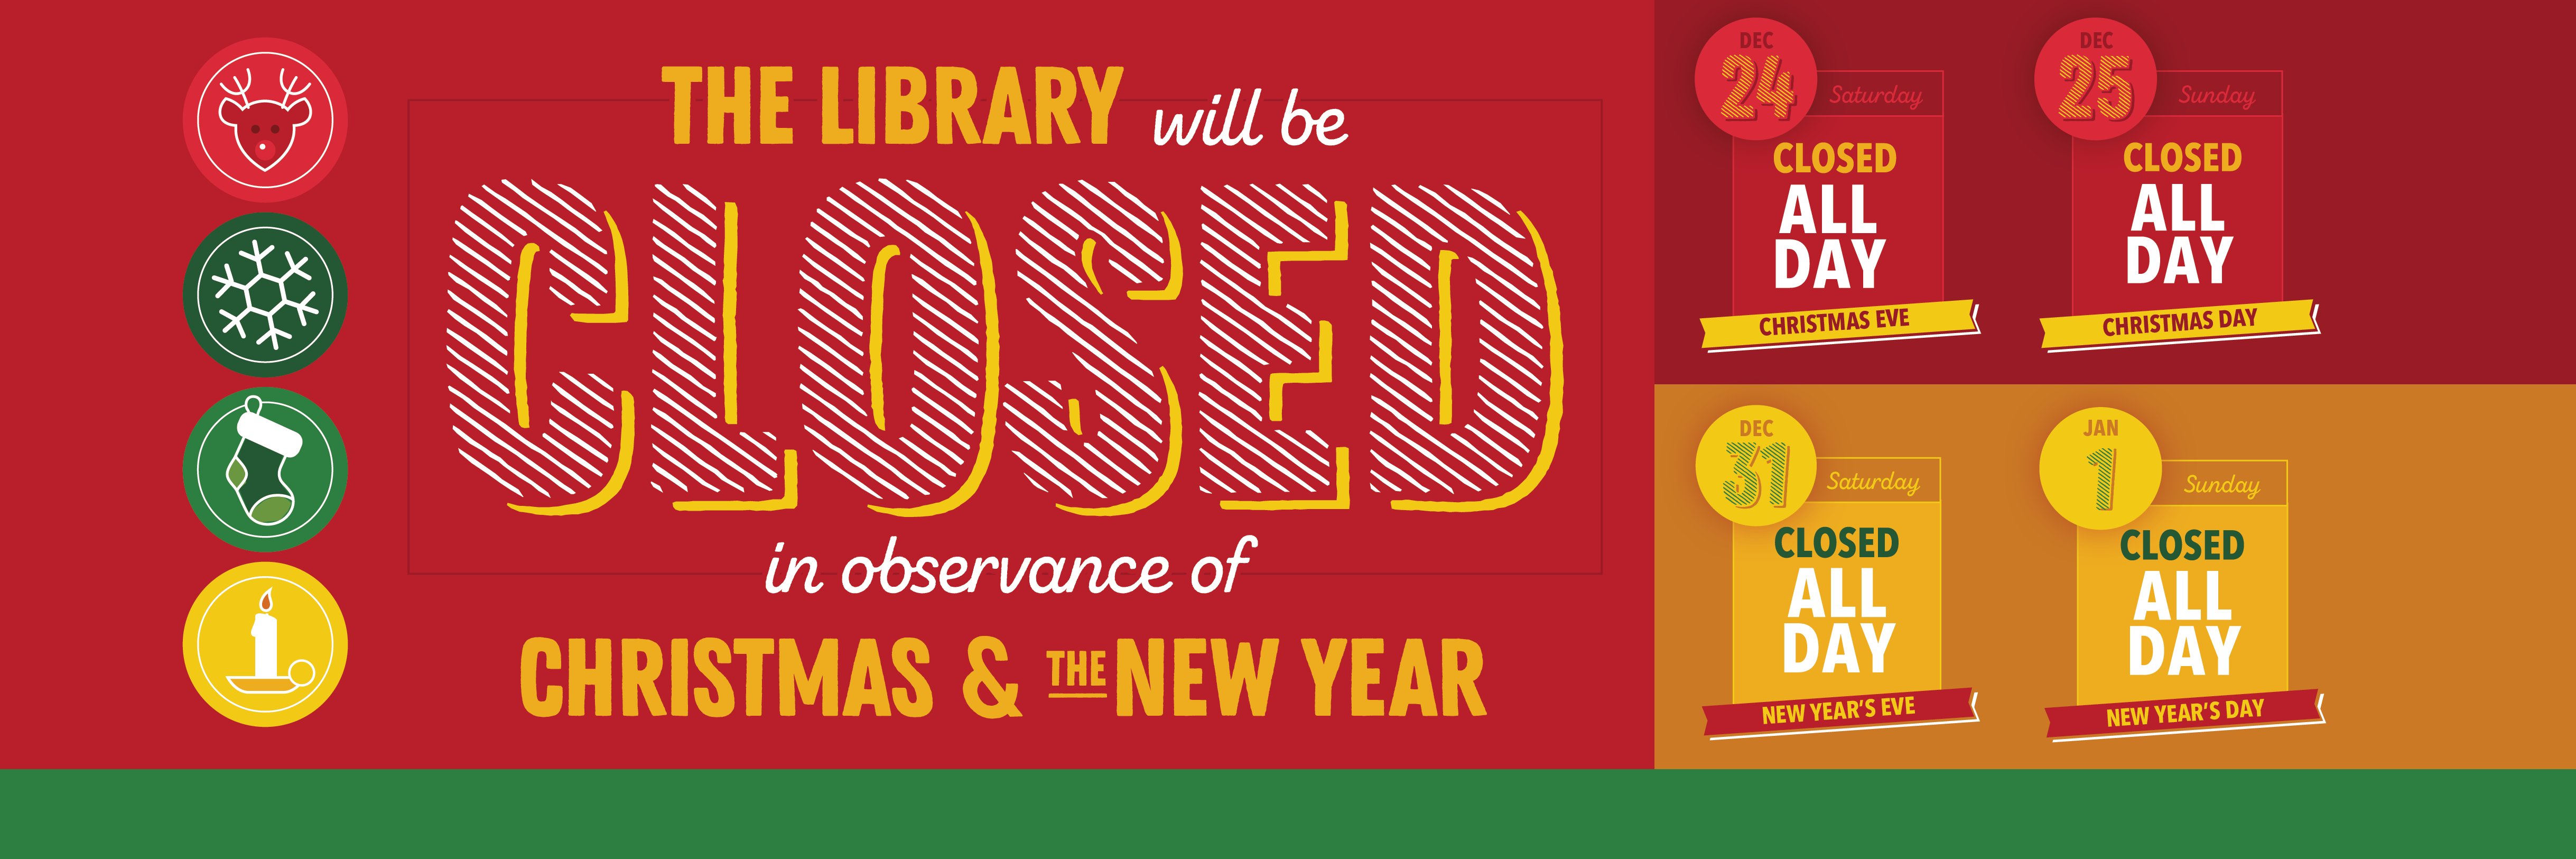 Holiday Closure information for Christmas and New Years